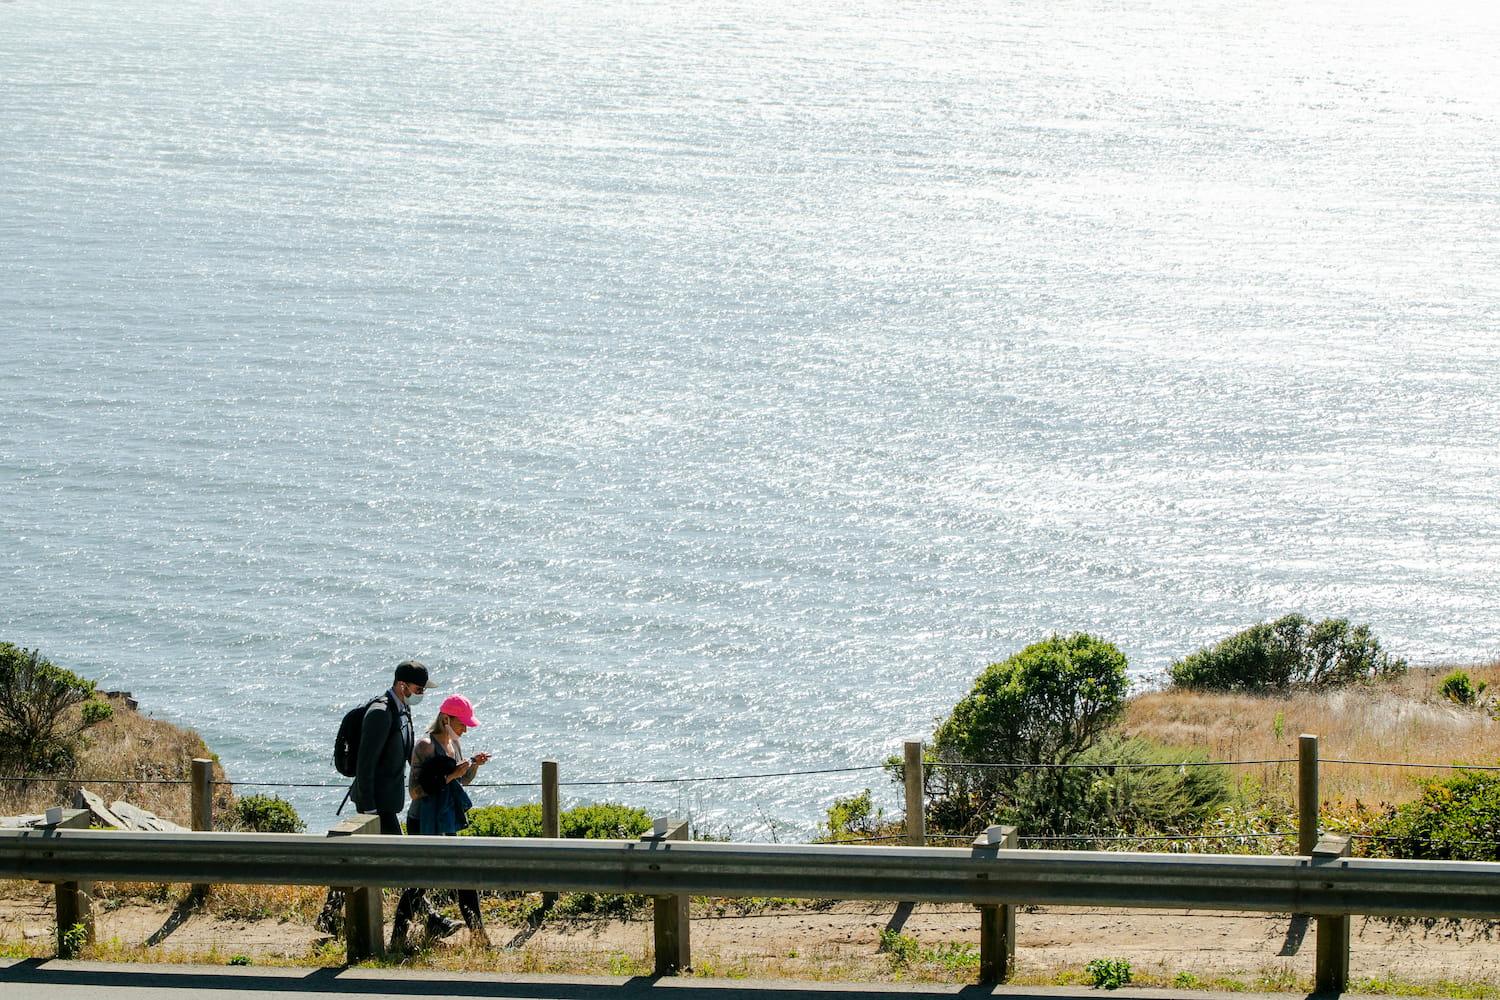 Man and woman walking along a dirt trail next to a roadside with the Pacific Ocean in the background.